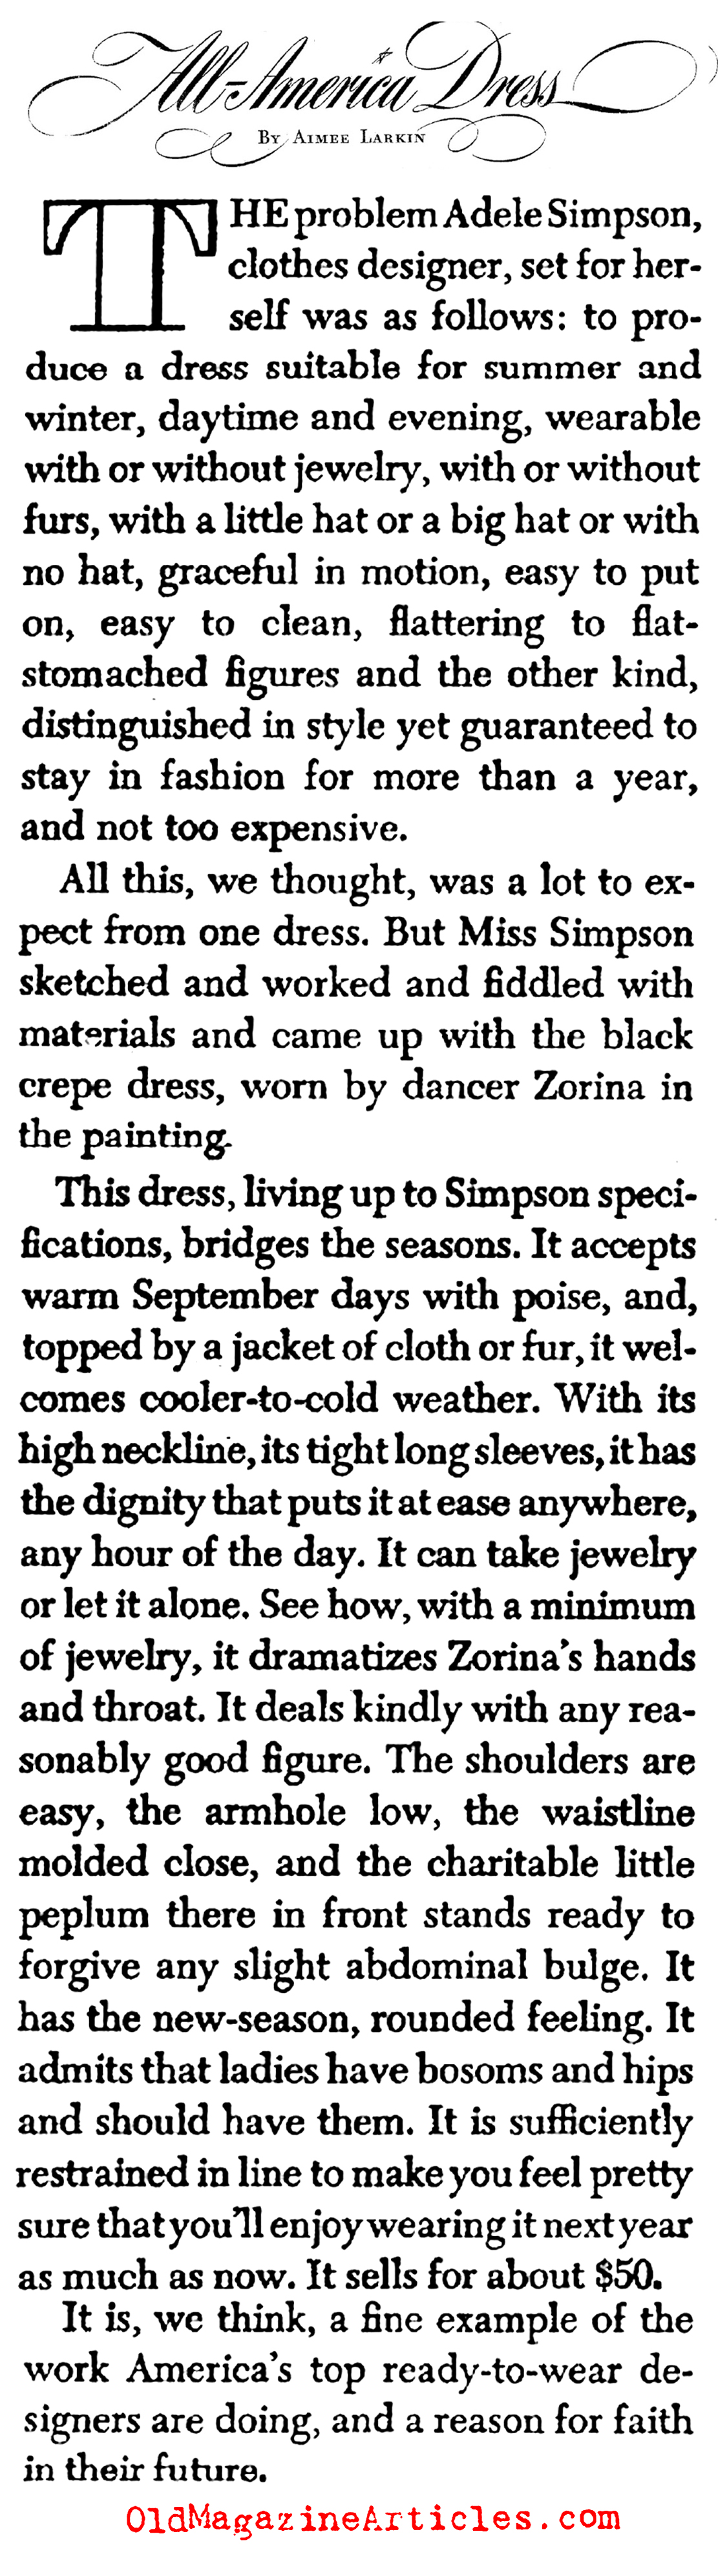 Adele Simpson and Her Fashions (Collier's Magazine, 1945)